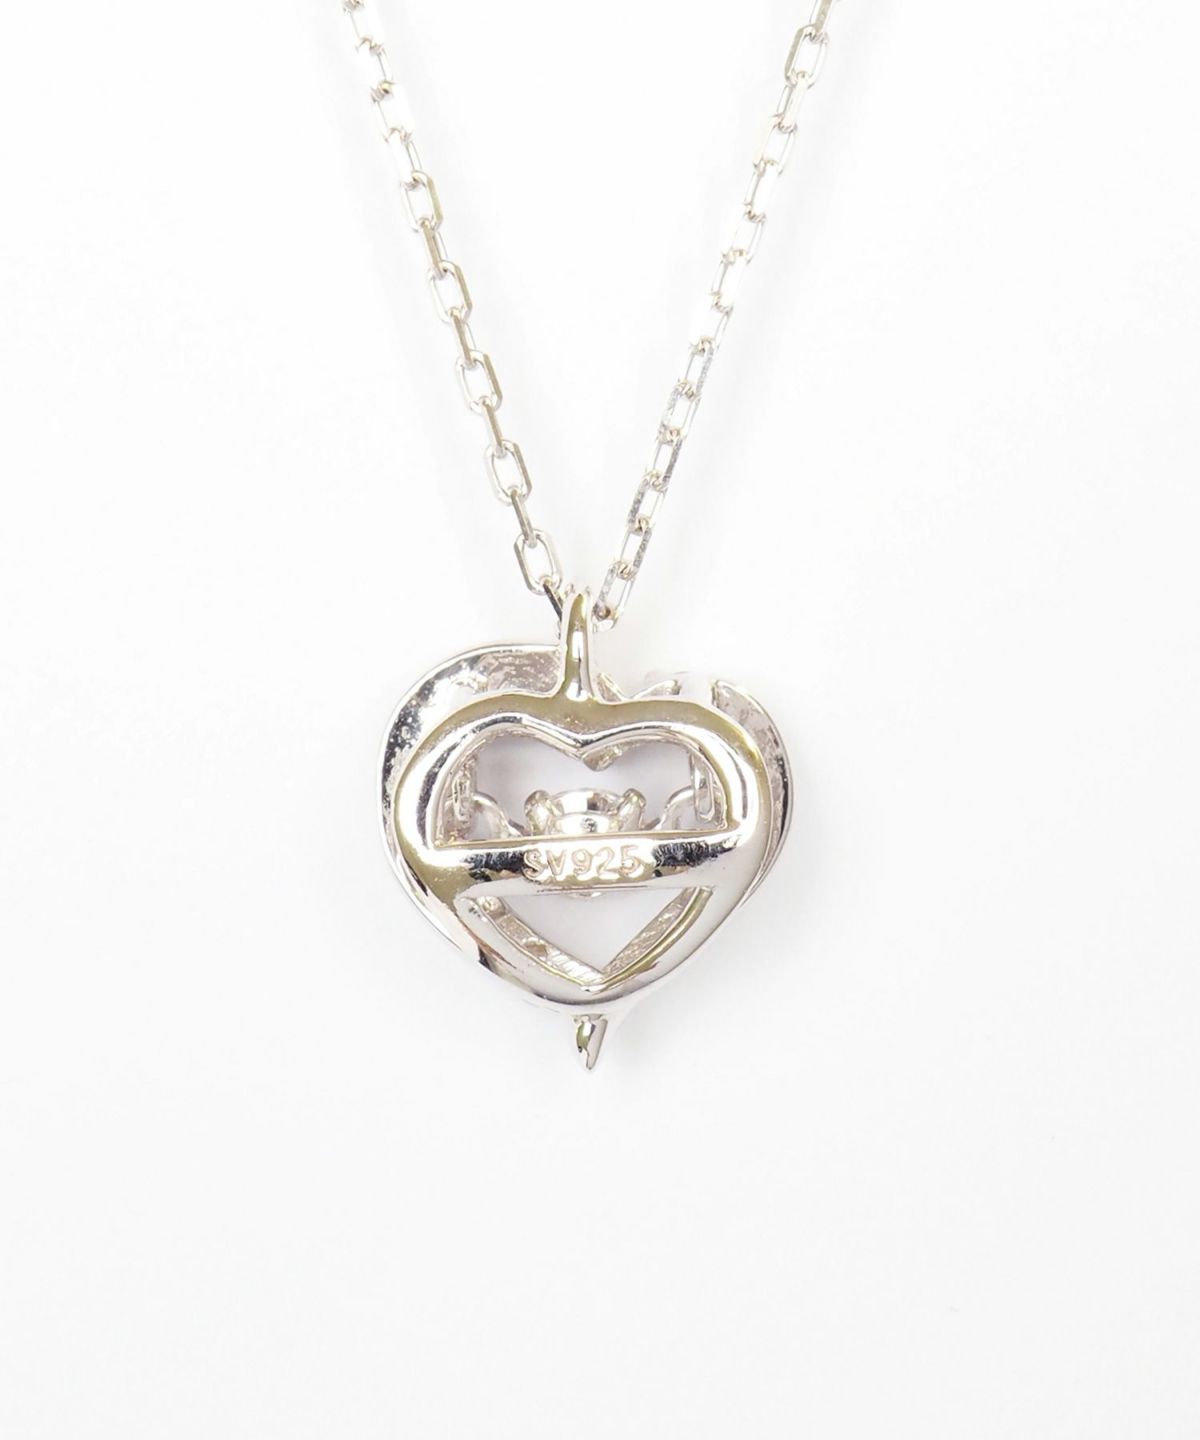 Heart frame 925 Silver Dancing Stone Pendant【H&Ccollection】